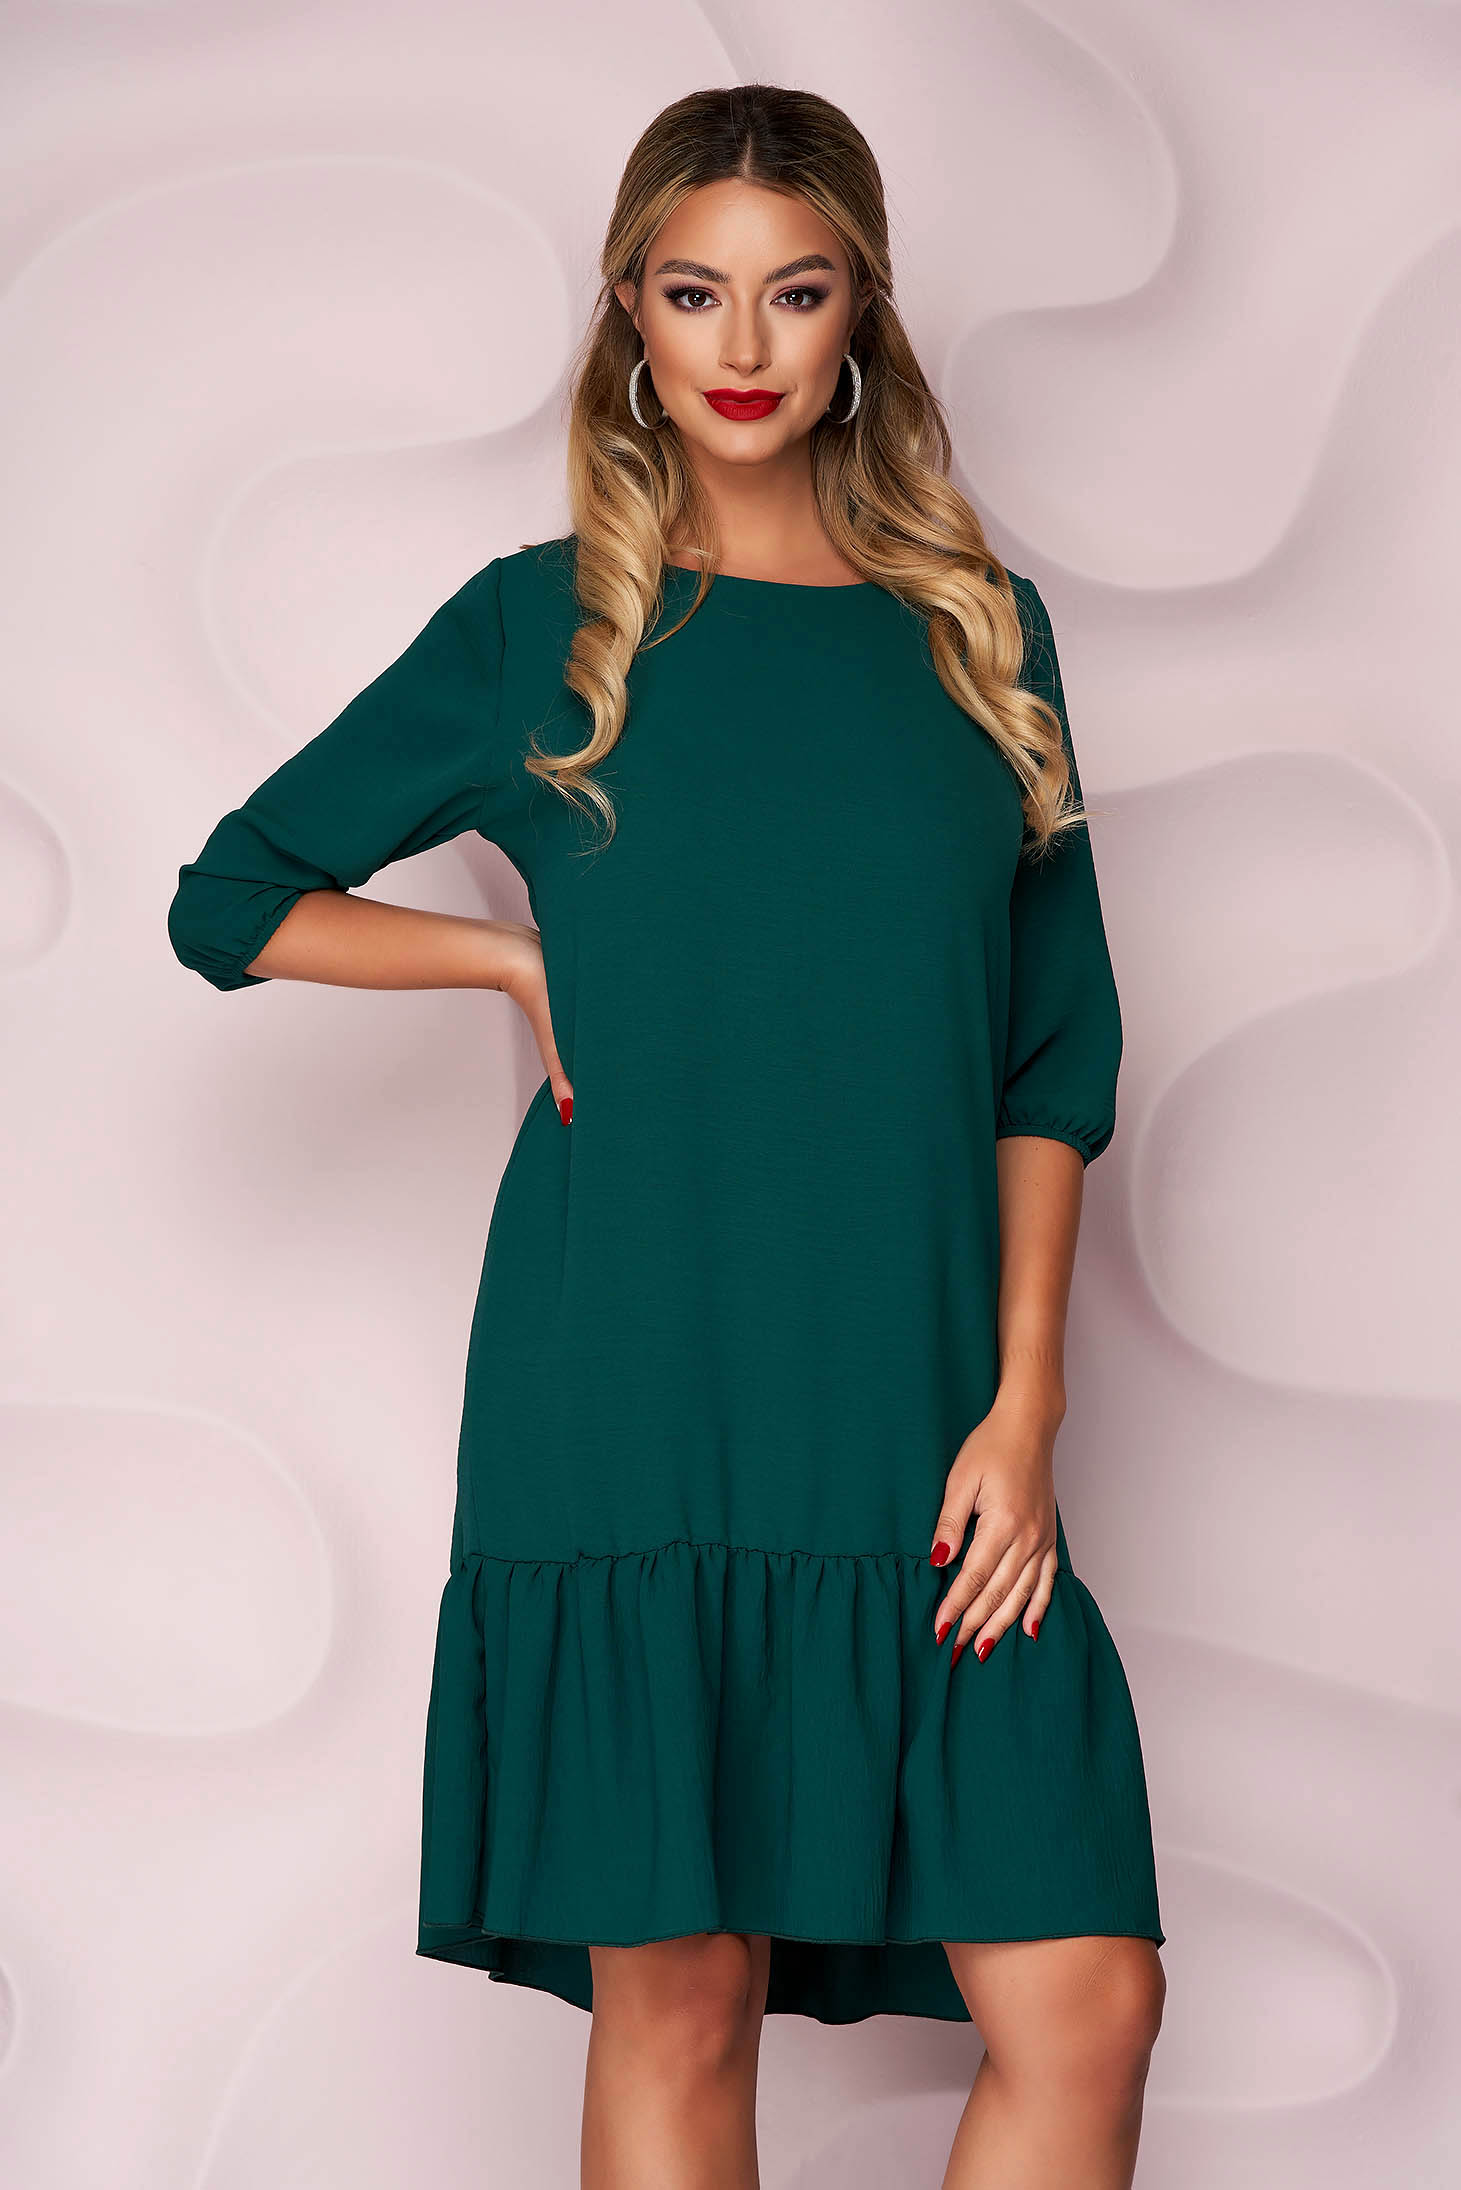 Darkgreen dress with ruffle details from veil fabric loose fit with 3/4 sleeves